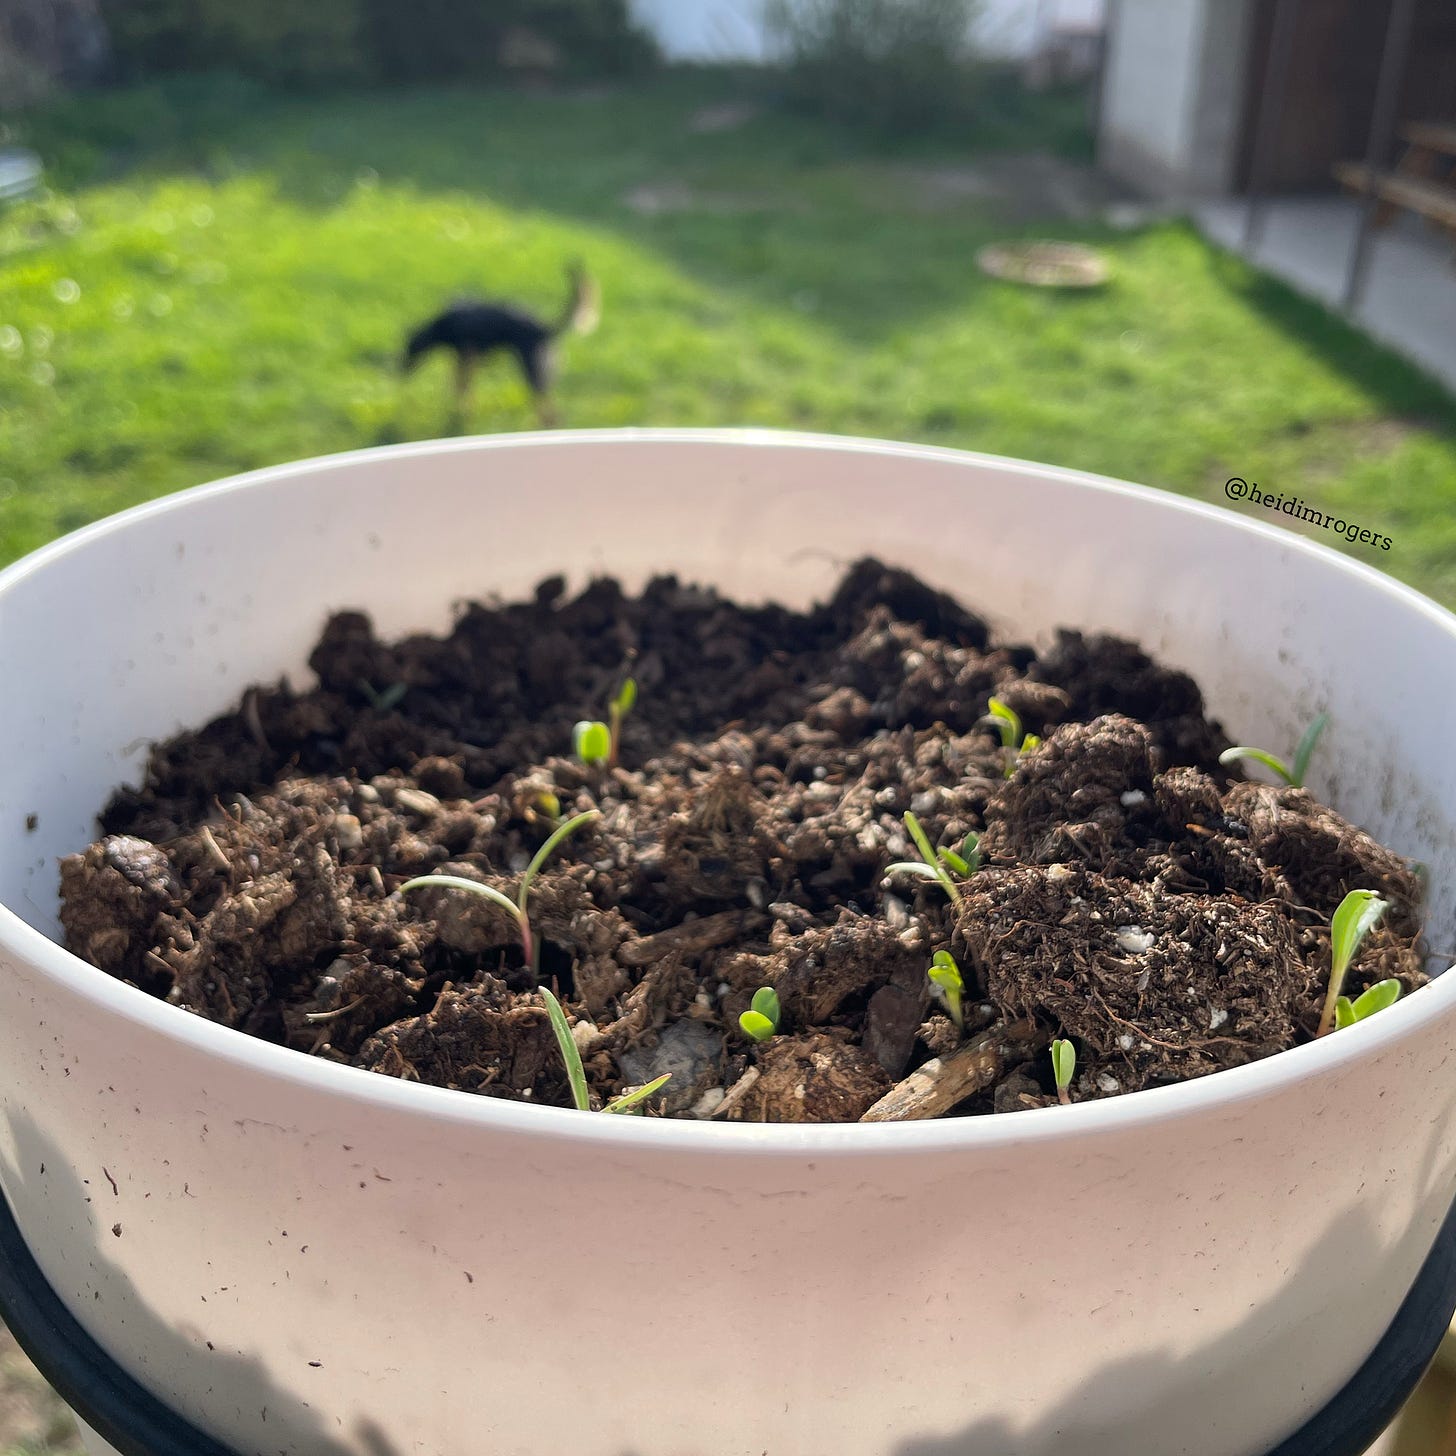 Close-up photo of a pot filled with soil and sprouts, with grass and a dog blurred in the background.